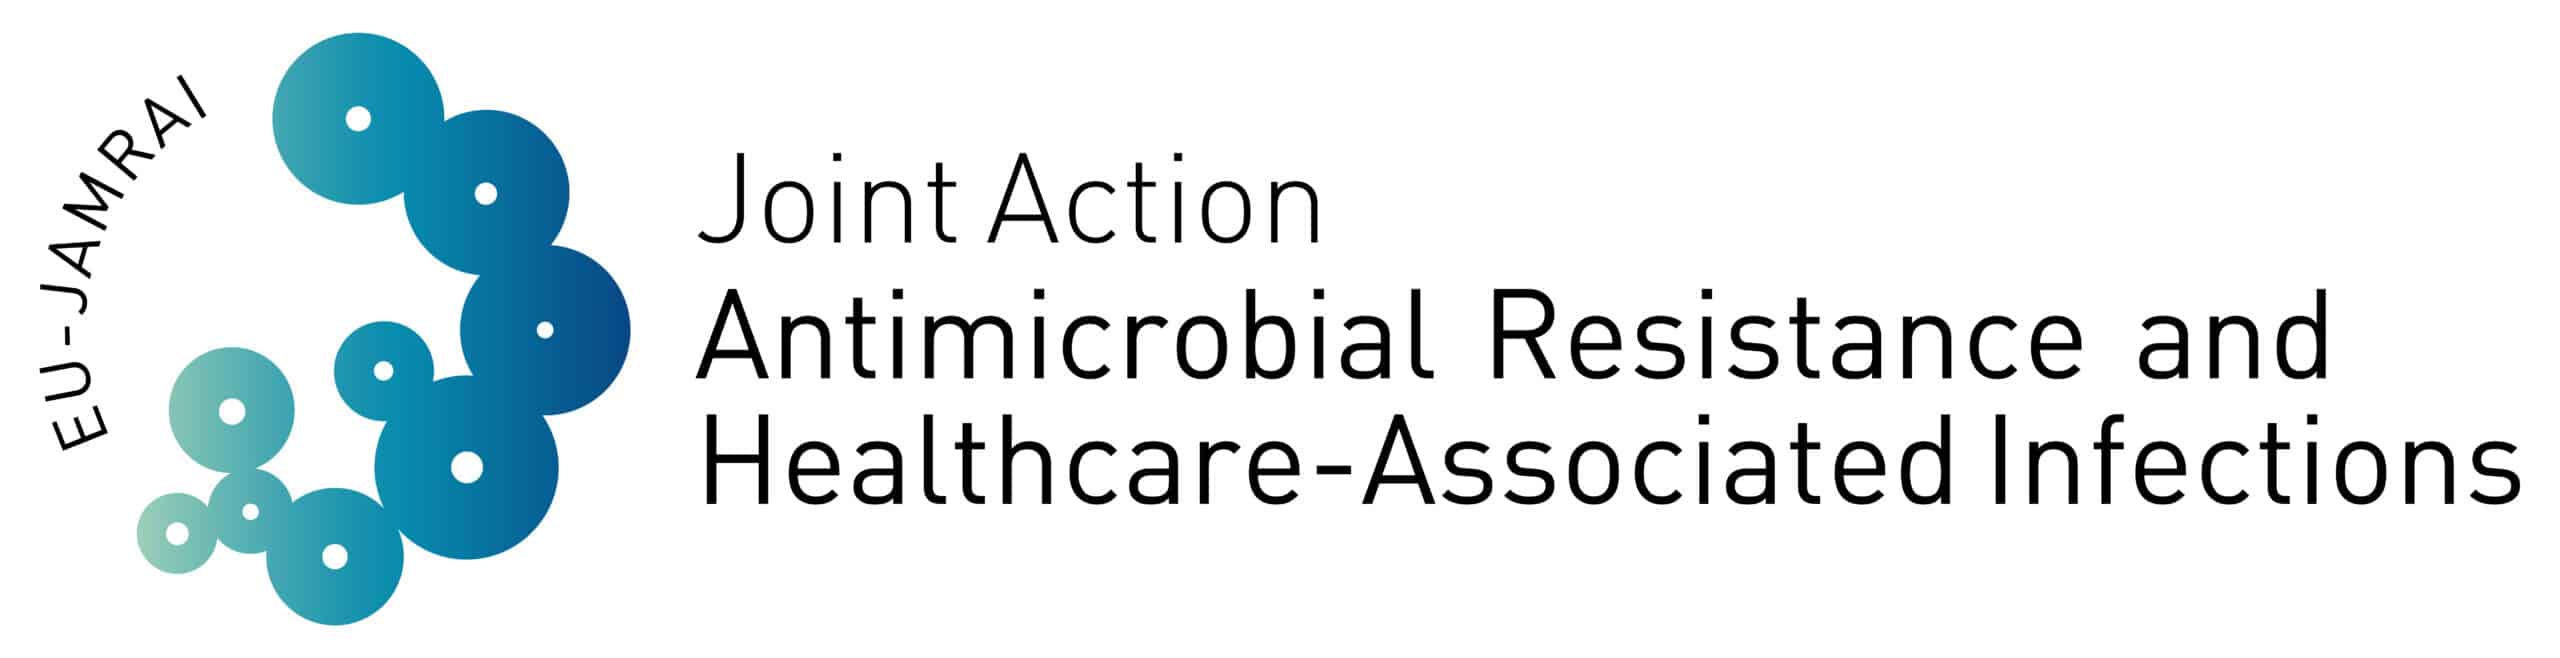 Logotipo de Joint Action Antimicrobial Resistance and Healthcare-Associated Infections JAMRAI2